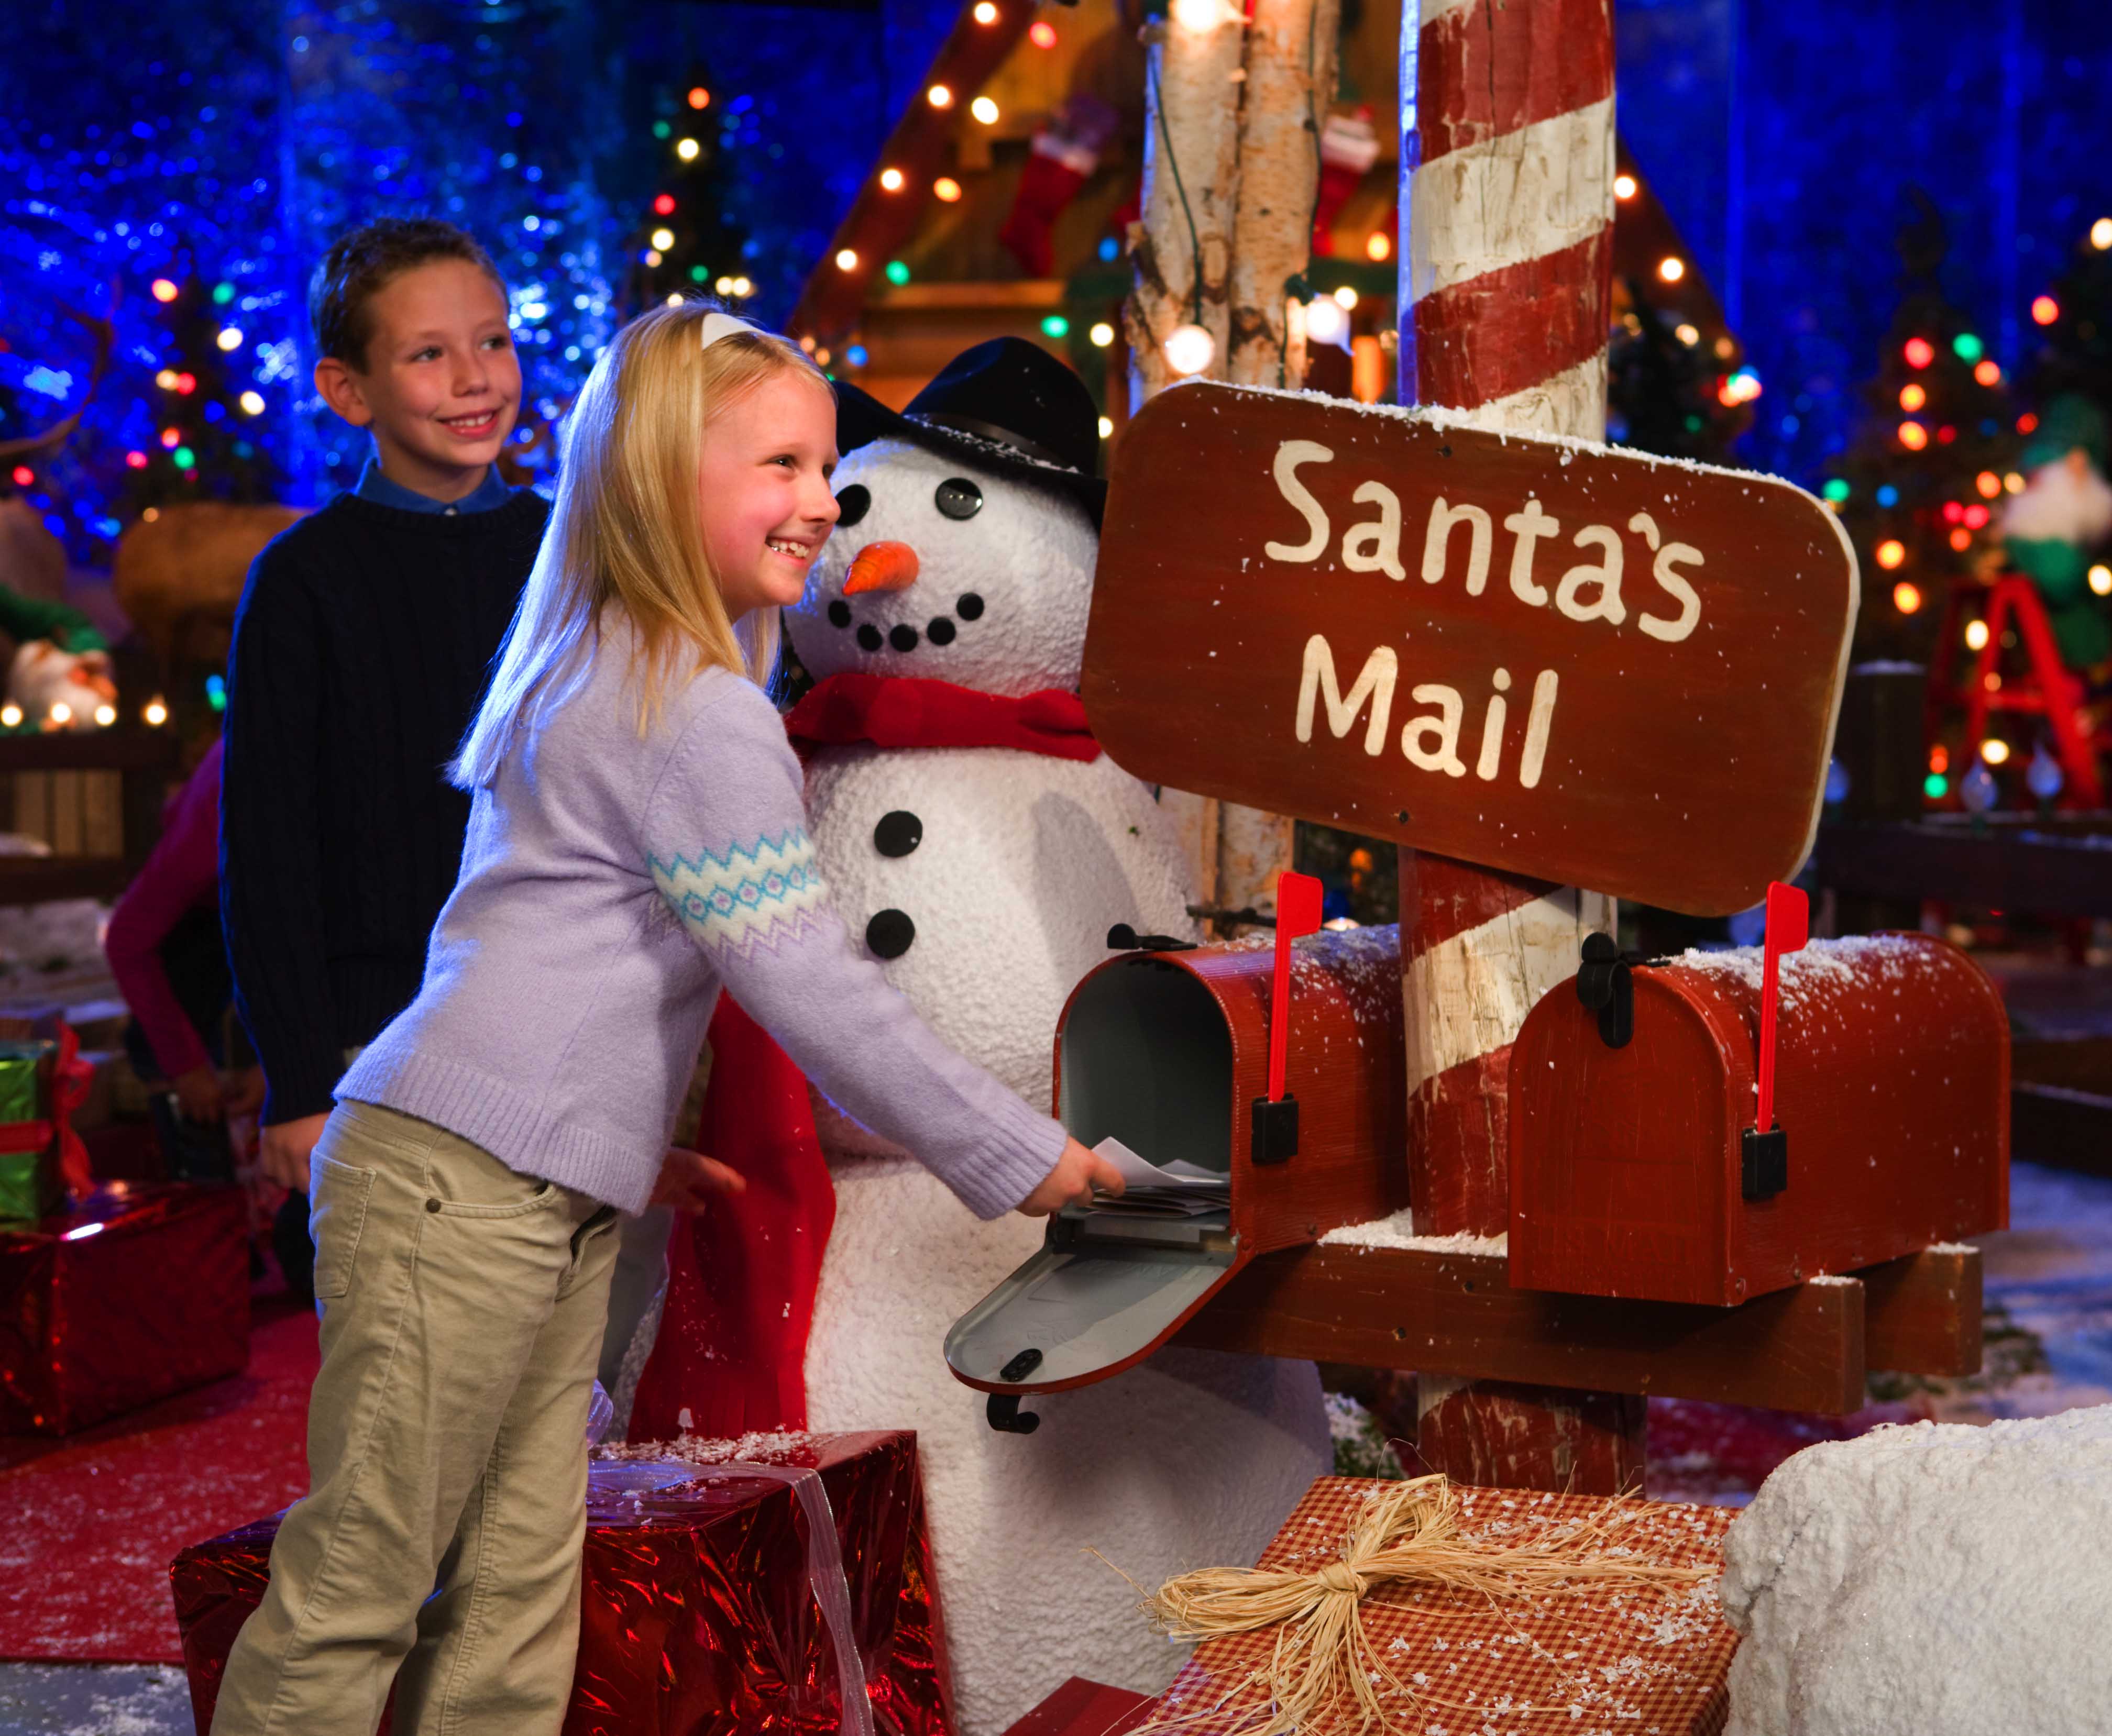 Bass Pro Shops Santa’s Wonderland gives families the chance to make special Christmas memories